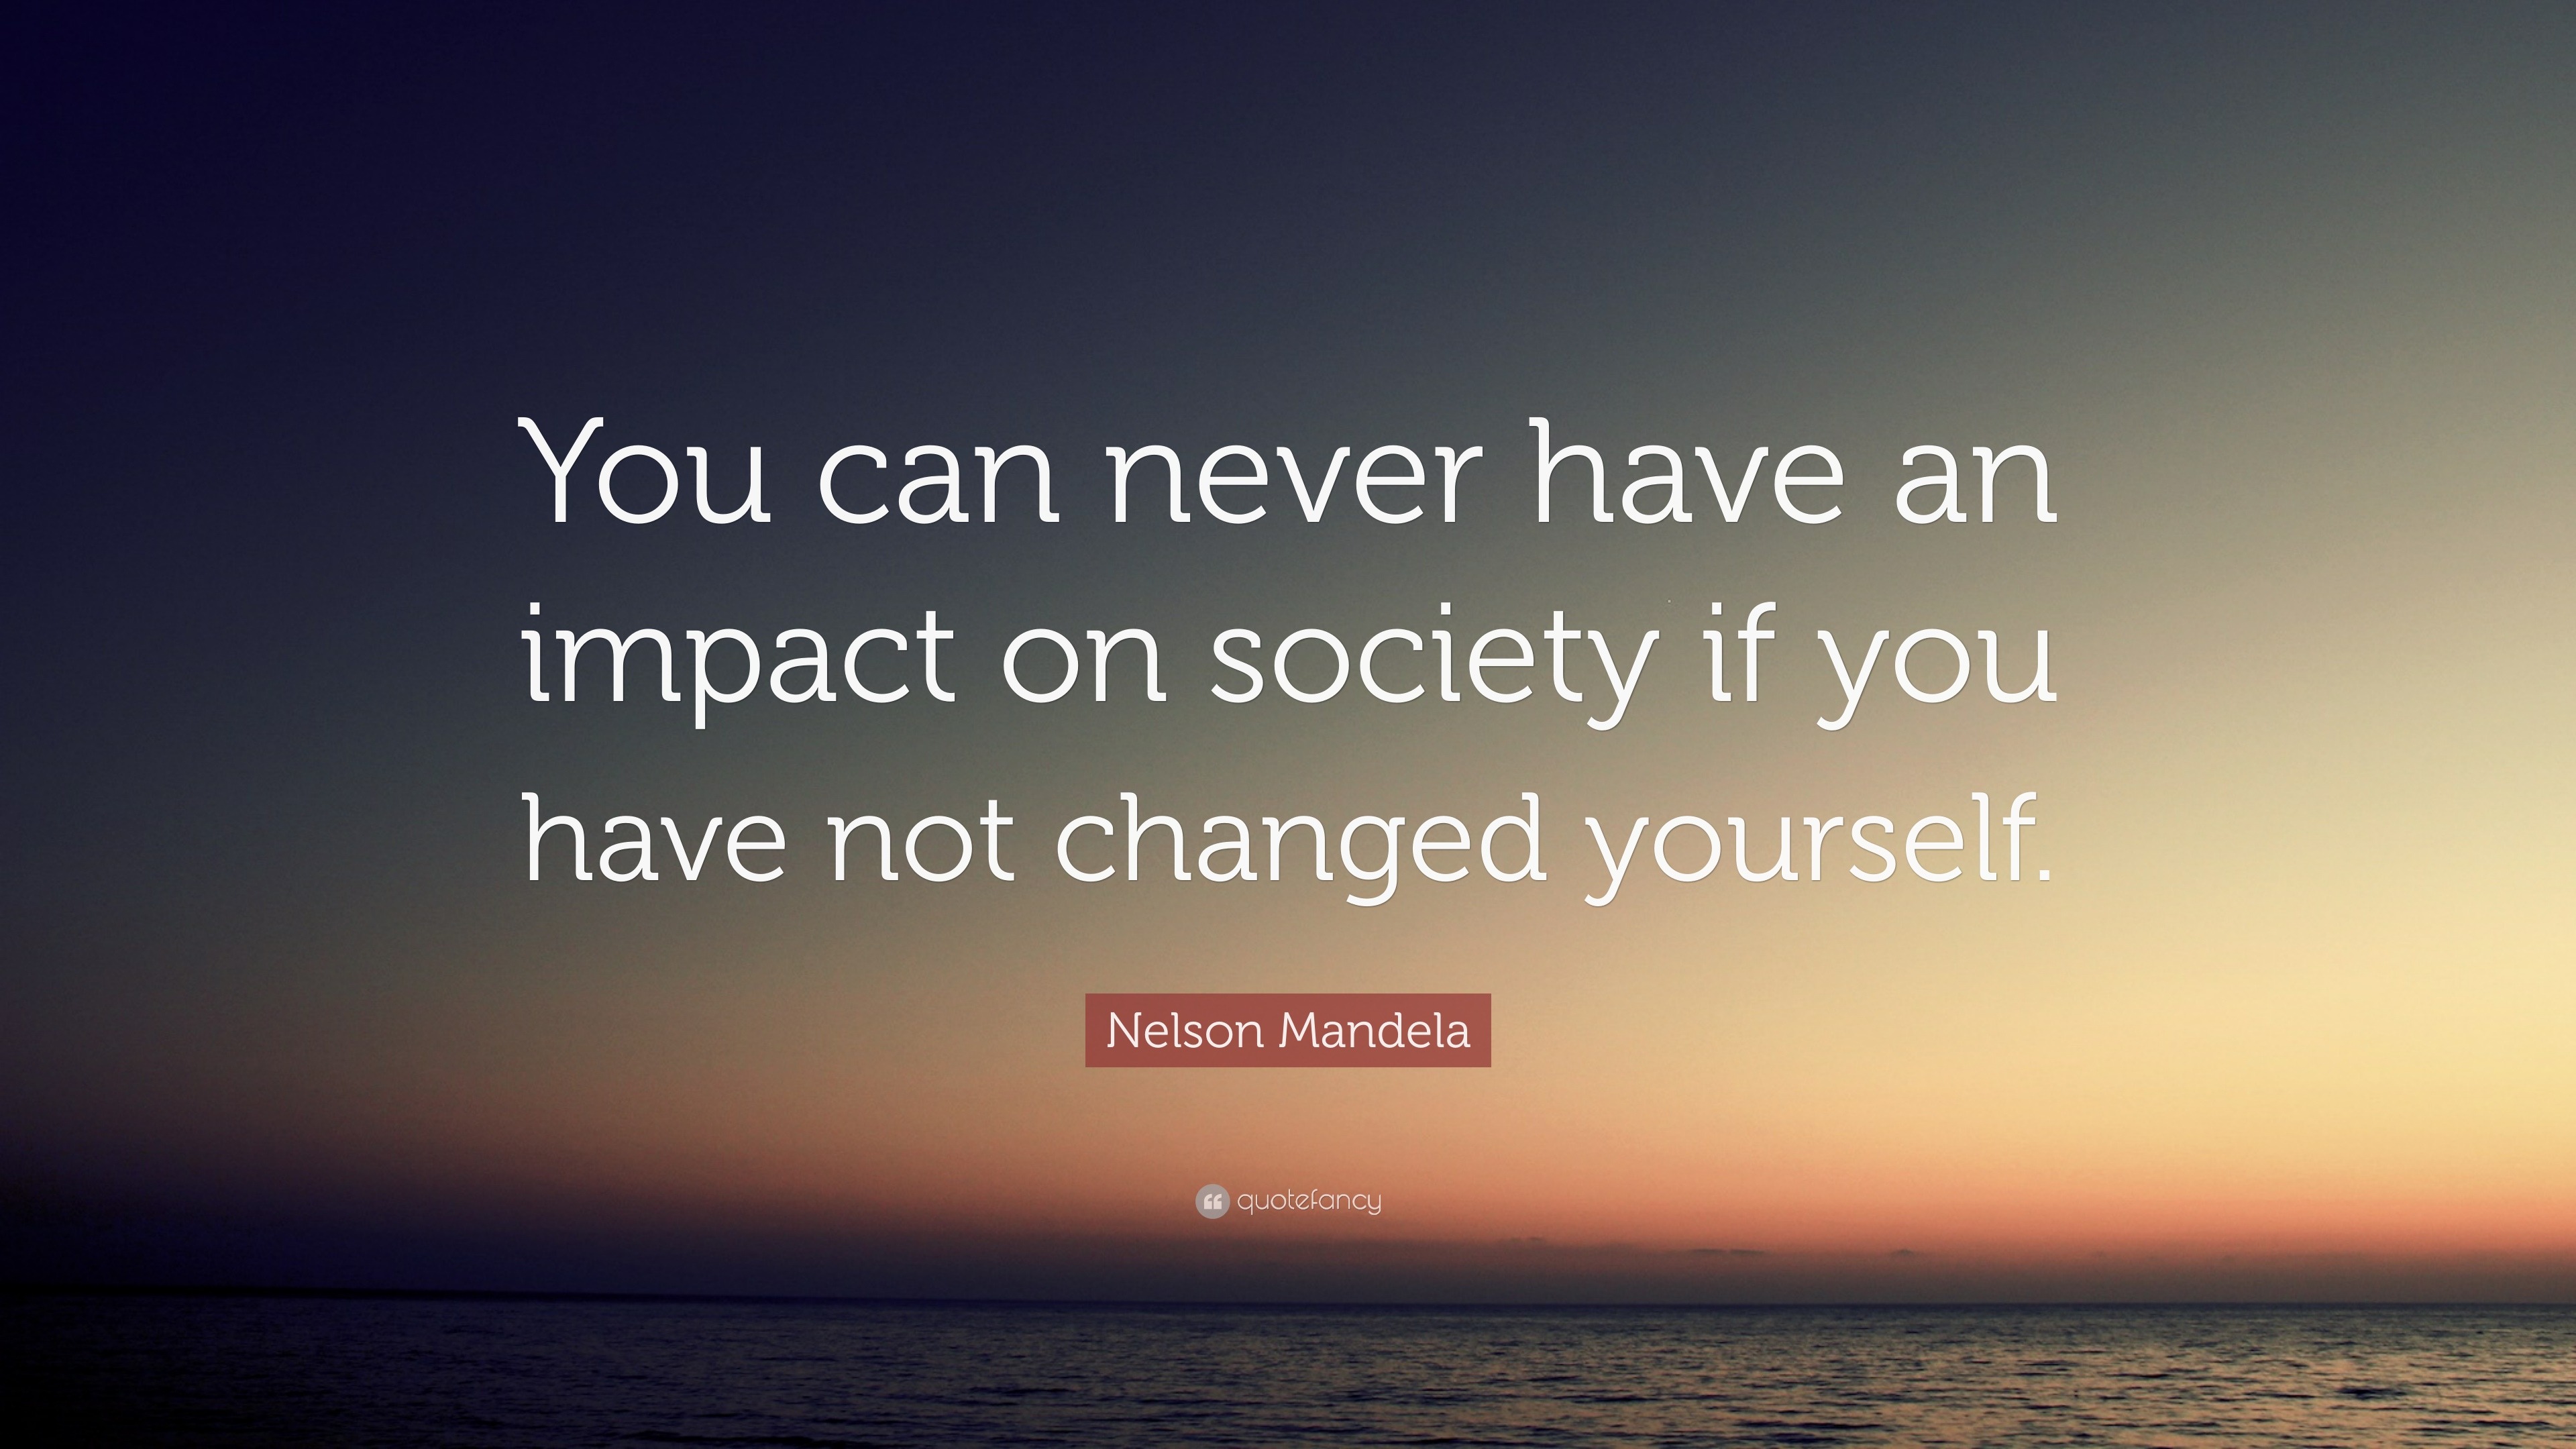 have an impact on